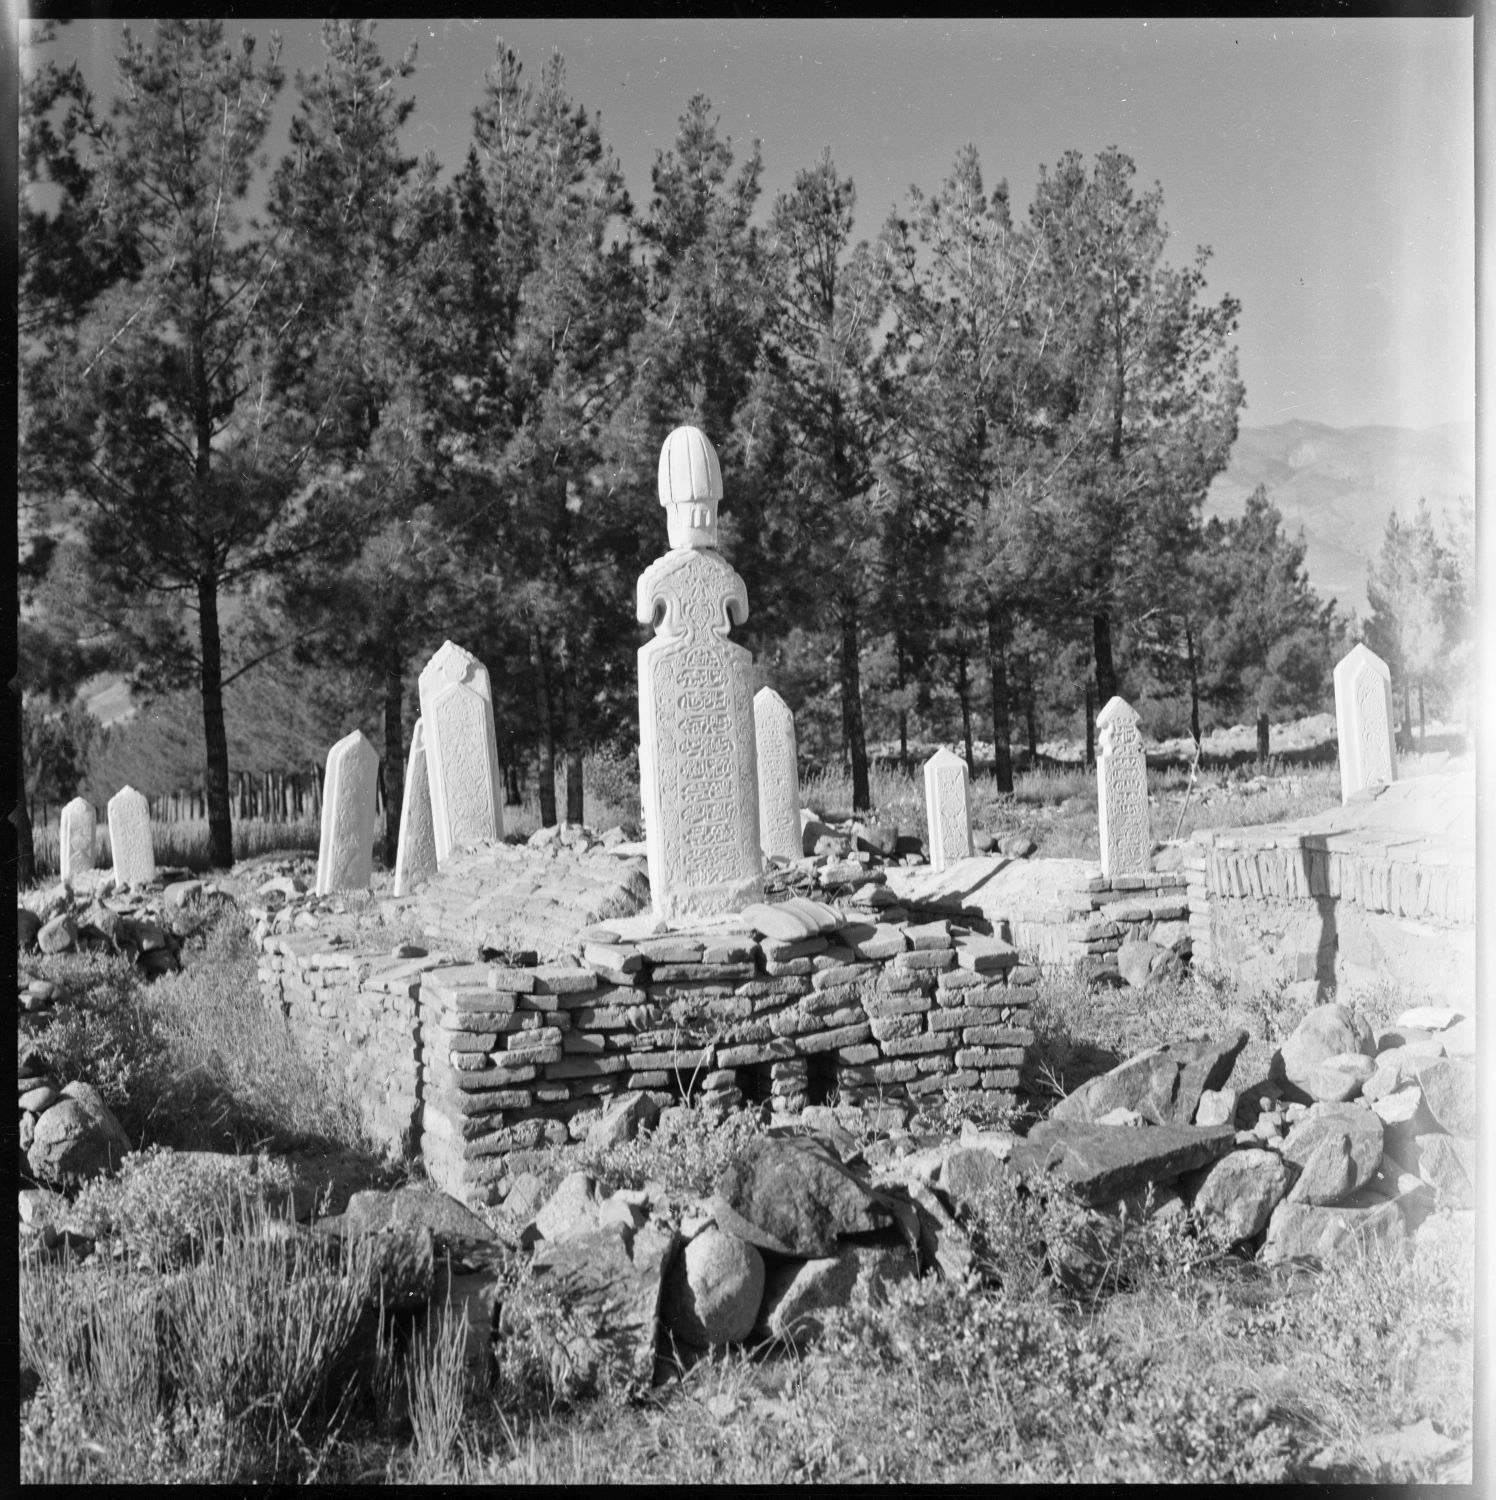 Josephine Powell - View of grave markers in the vicinity of Gunbad-i Chisht-i Sharif.